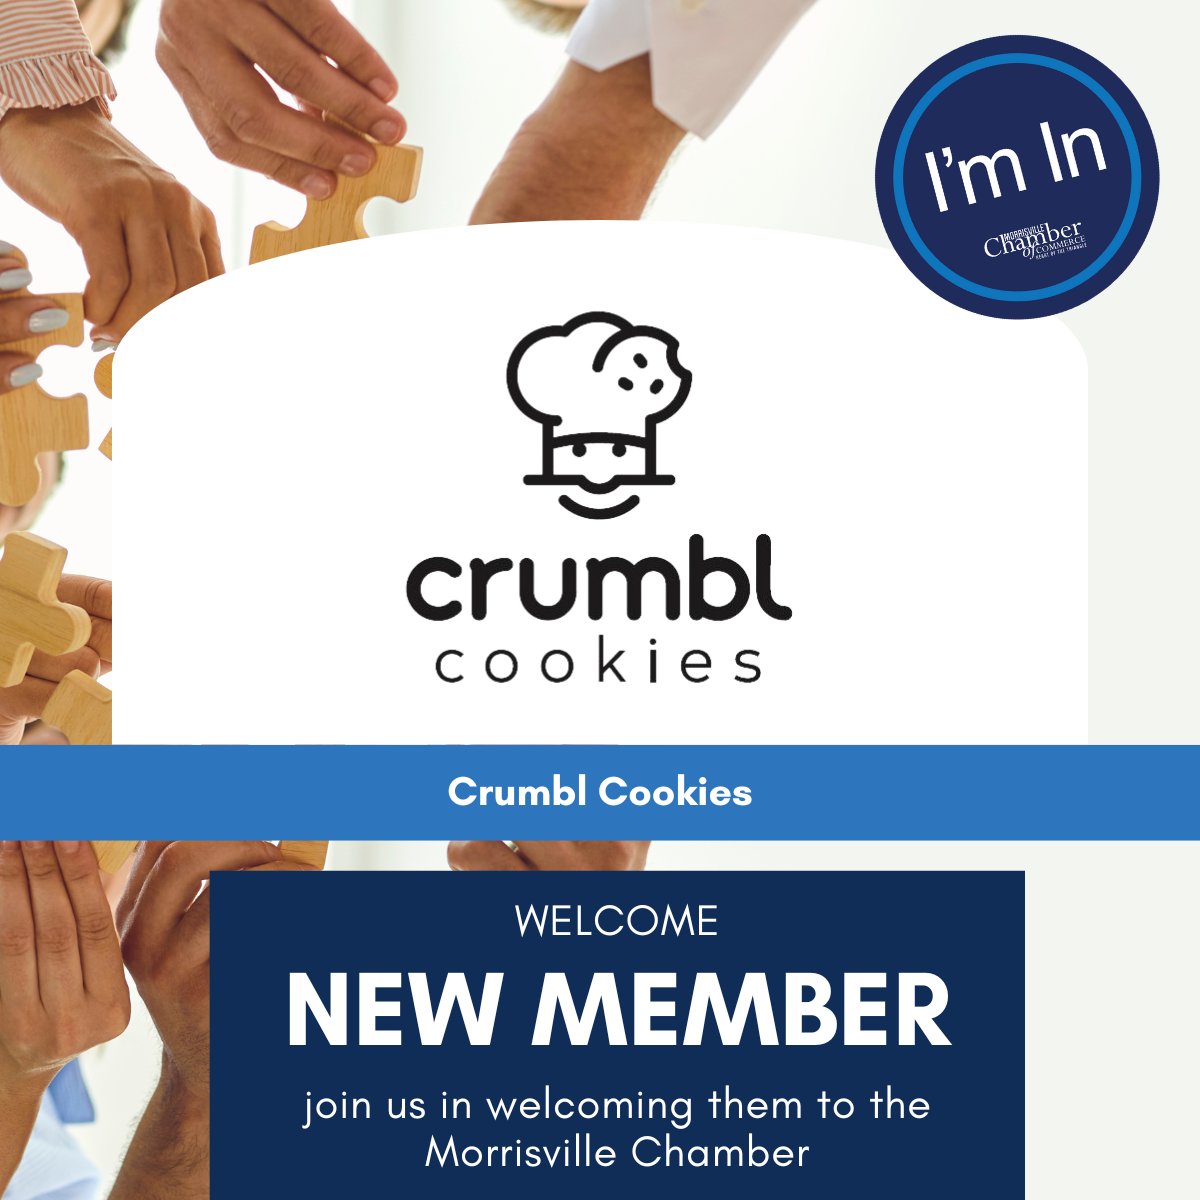 #WelcomeWednesday A new cookie is in town! Make sure to visit Crumbl Cookies at 1105 Market Center Drive for a weekly rotating menu of 6 deliciously flavors to experience. crumblcookies.com